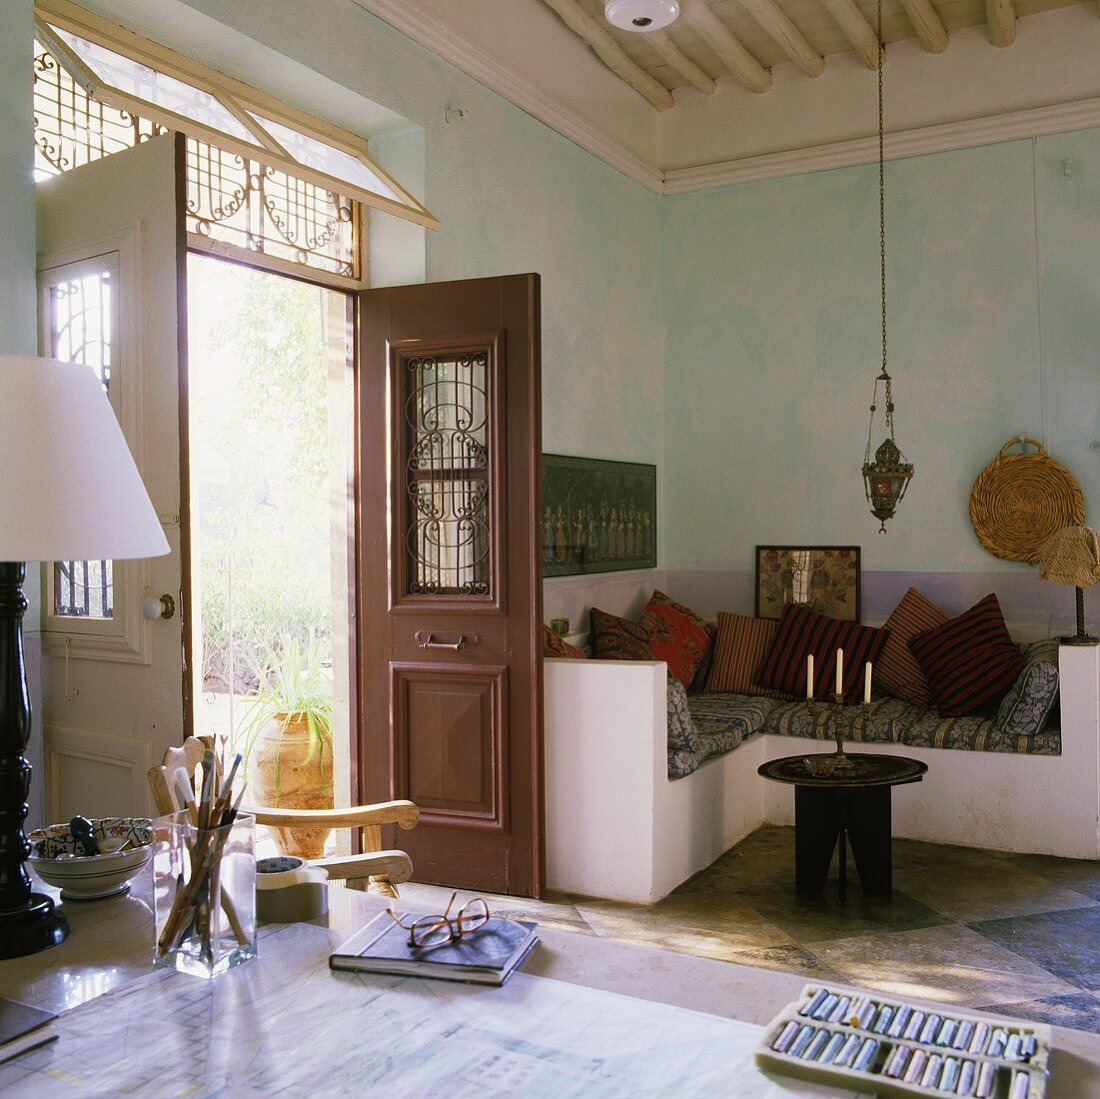 A living room in a Mediterranean house with a stone, upholstered seating corner and an open door with a view of the garden